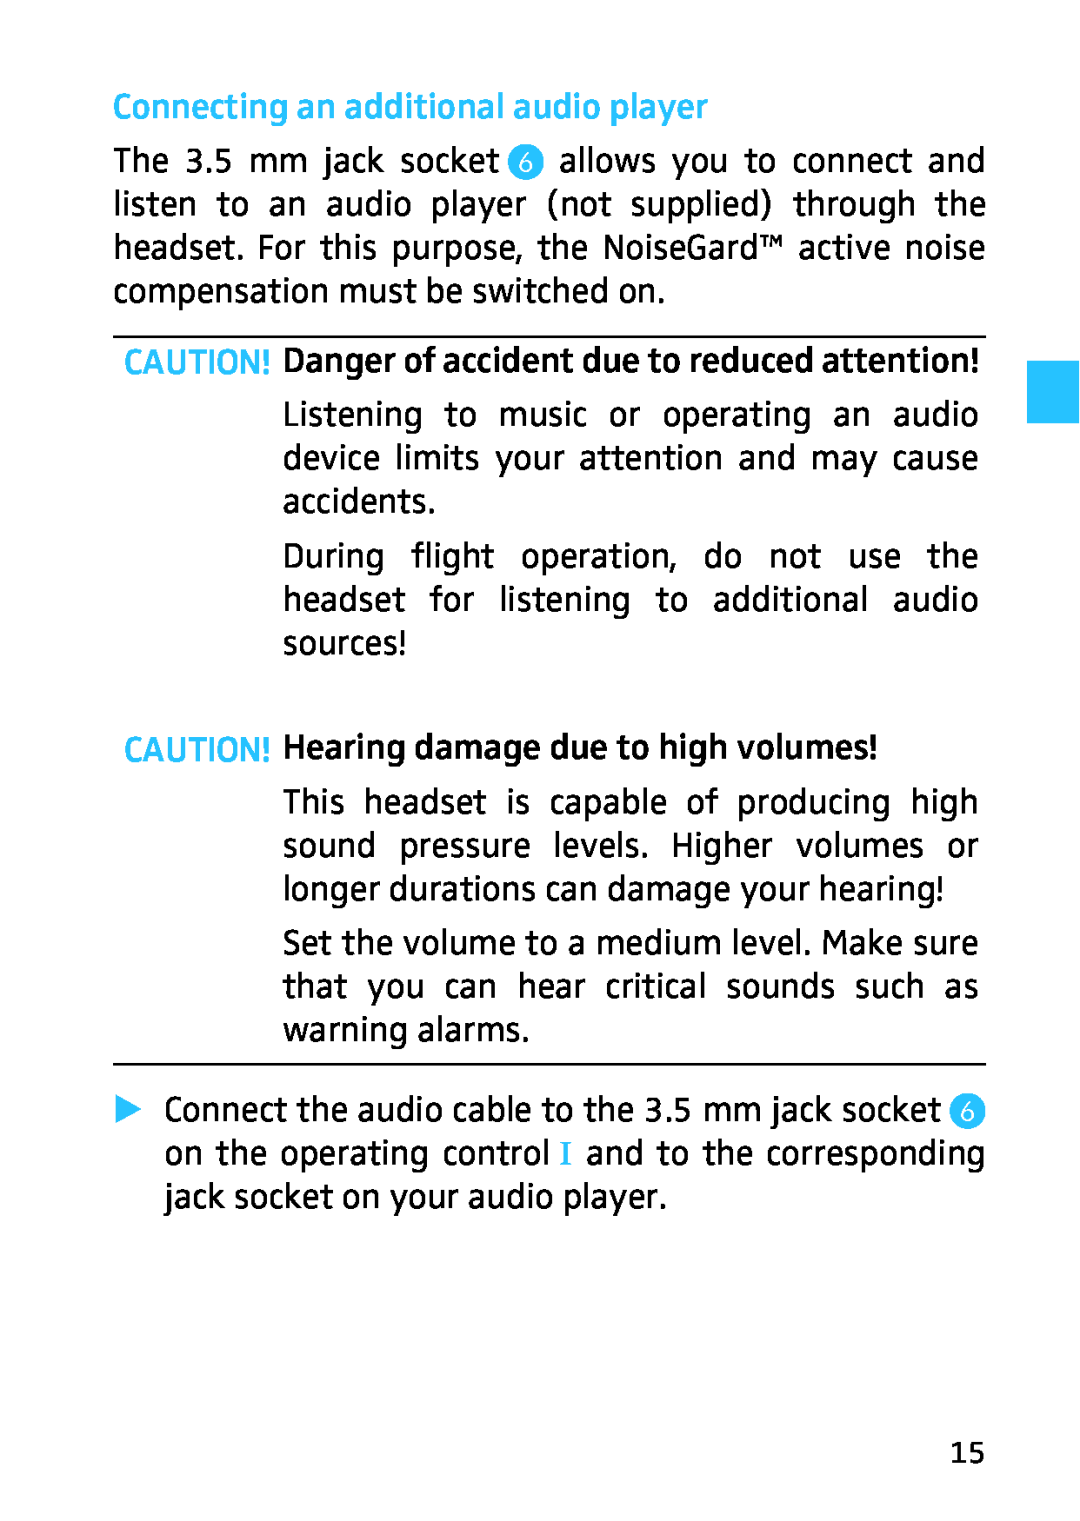 Sennheiser 502399, HMEC 26, 523983/A01 Connecting an additional audio player, CAUTION! Hearing damage due to high volumes 